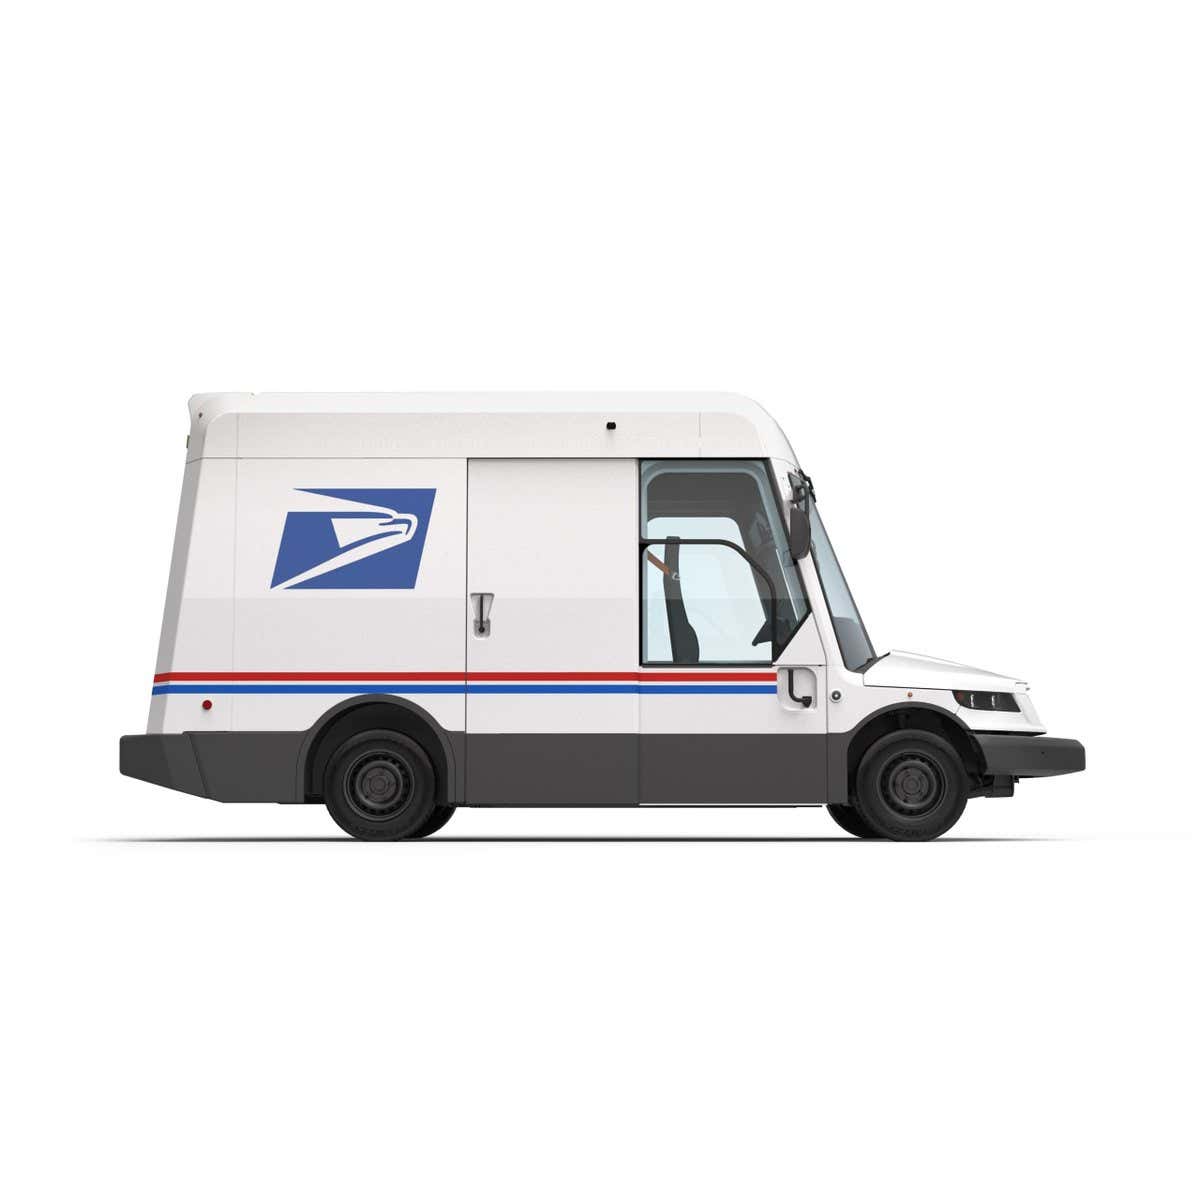 This Is The United States Postal Service’s New Delivery Vehicle | Highwaytale.com